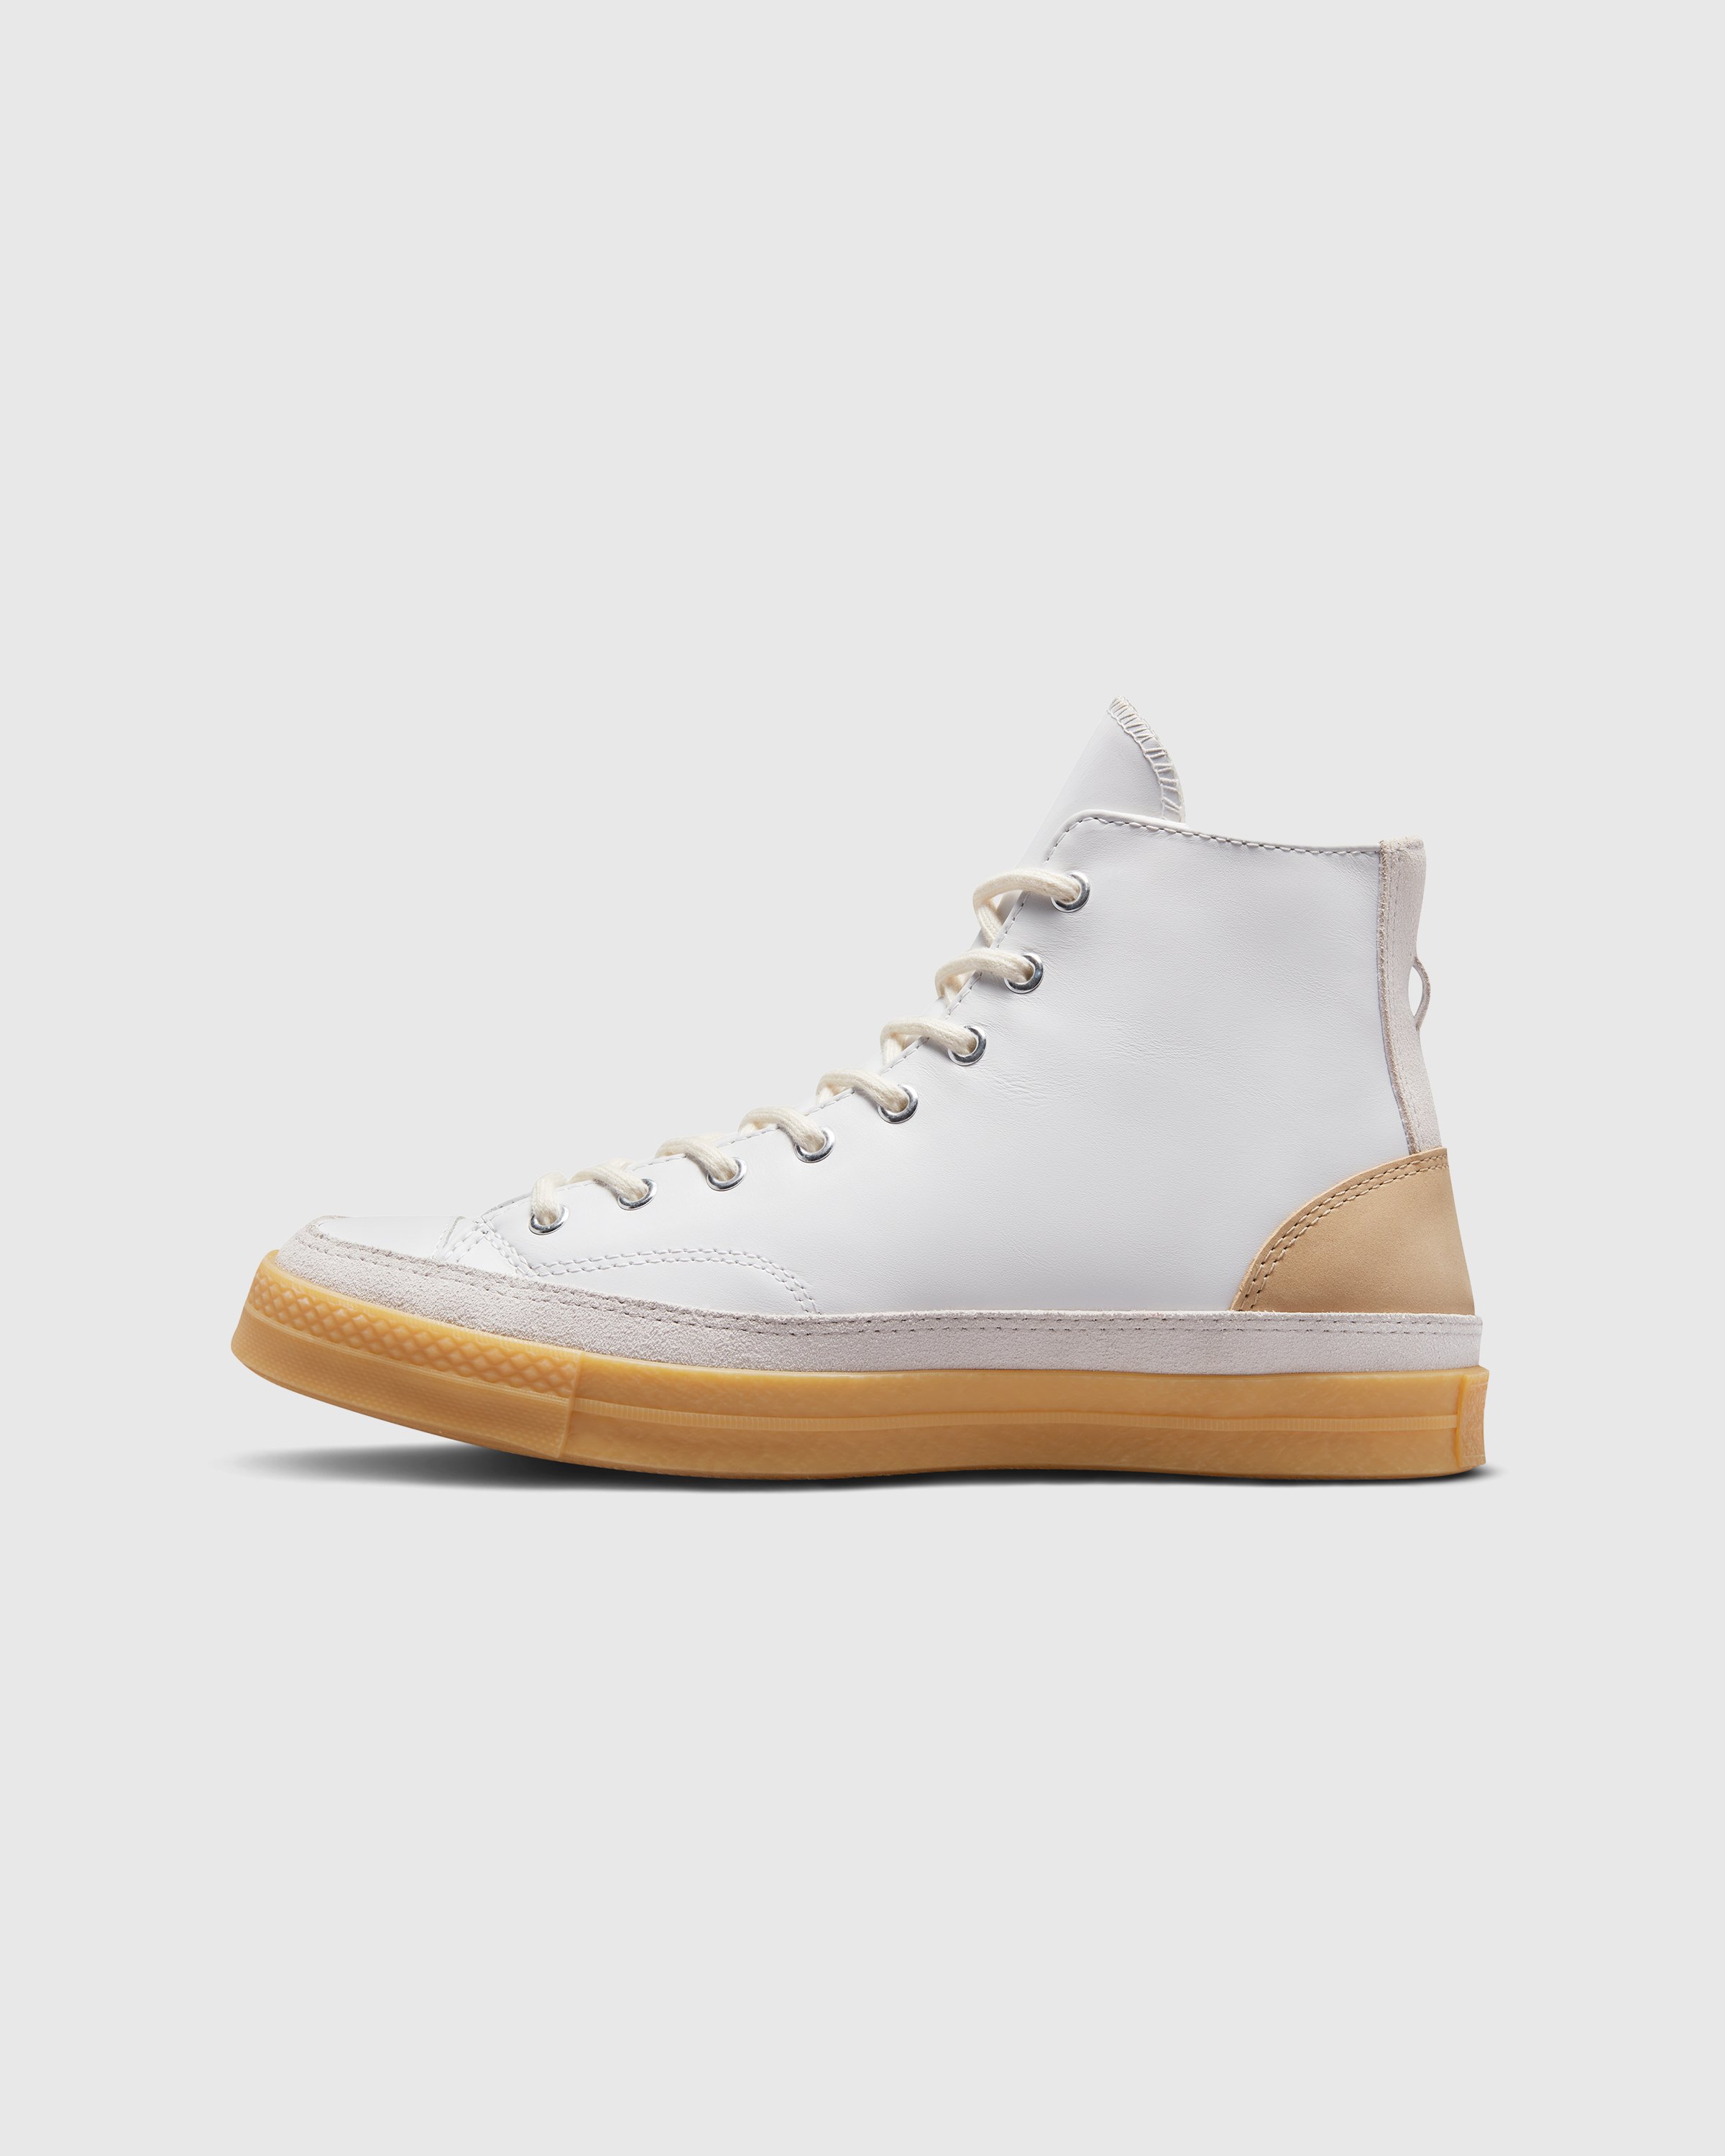 Converse - Chuck 70 Hi South of Houston White/Sunlight/Pale Putty - Footwear - White - Image 2